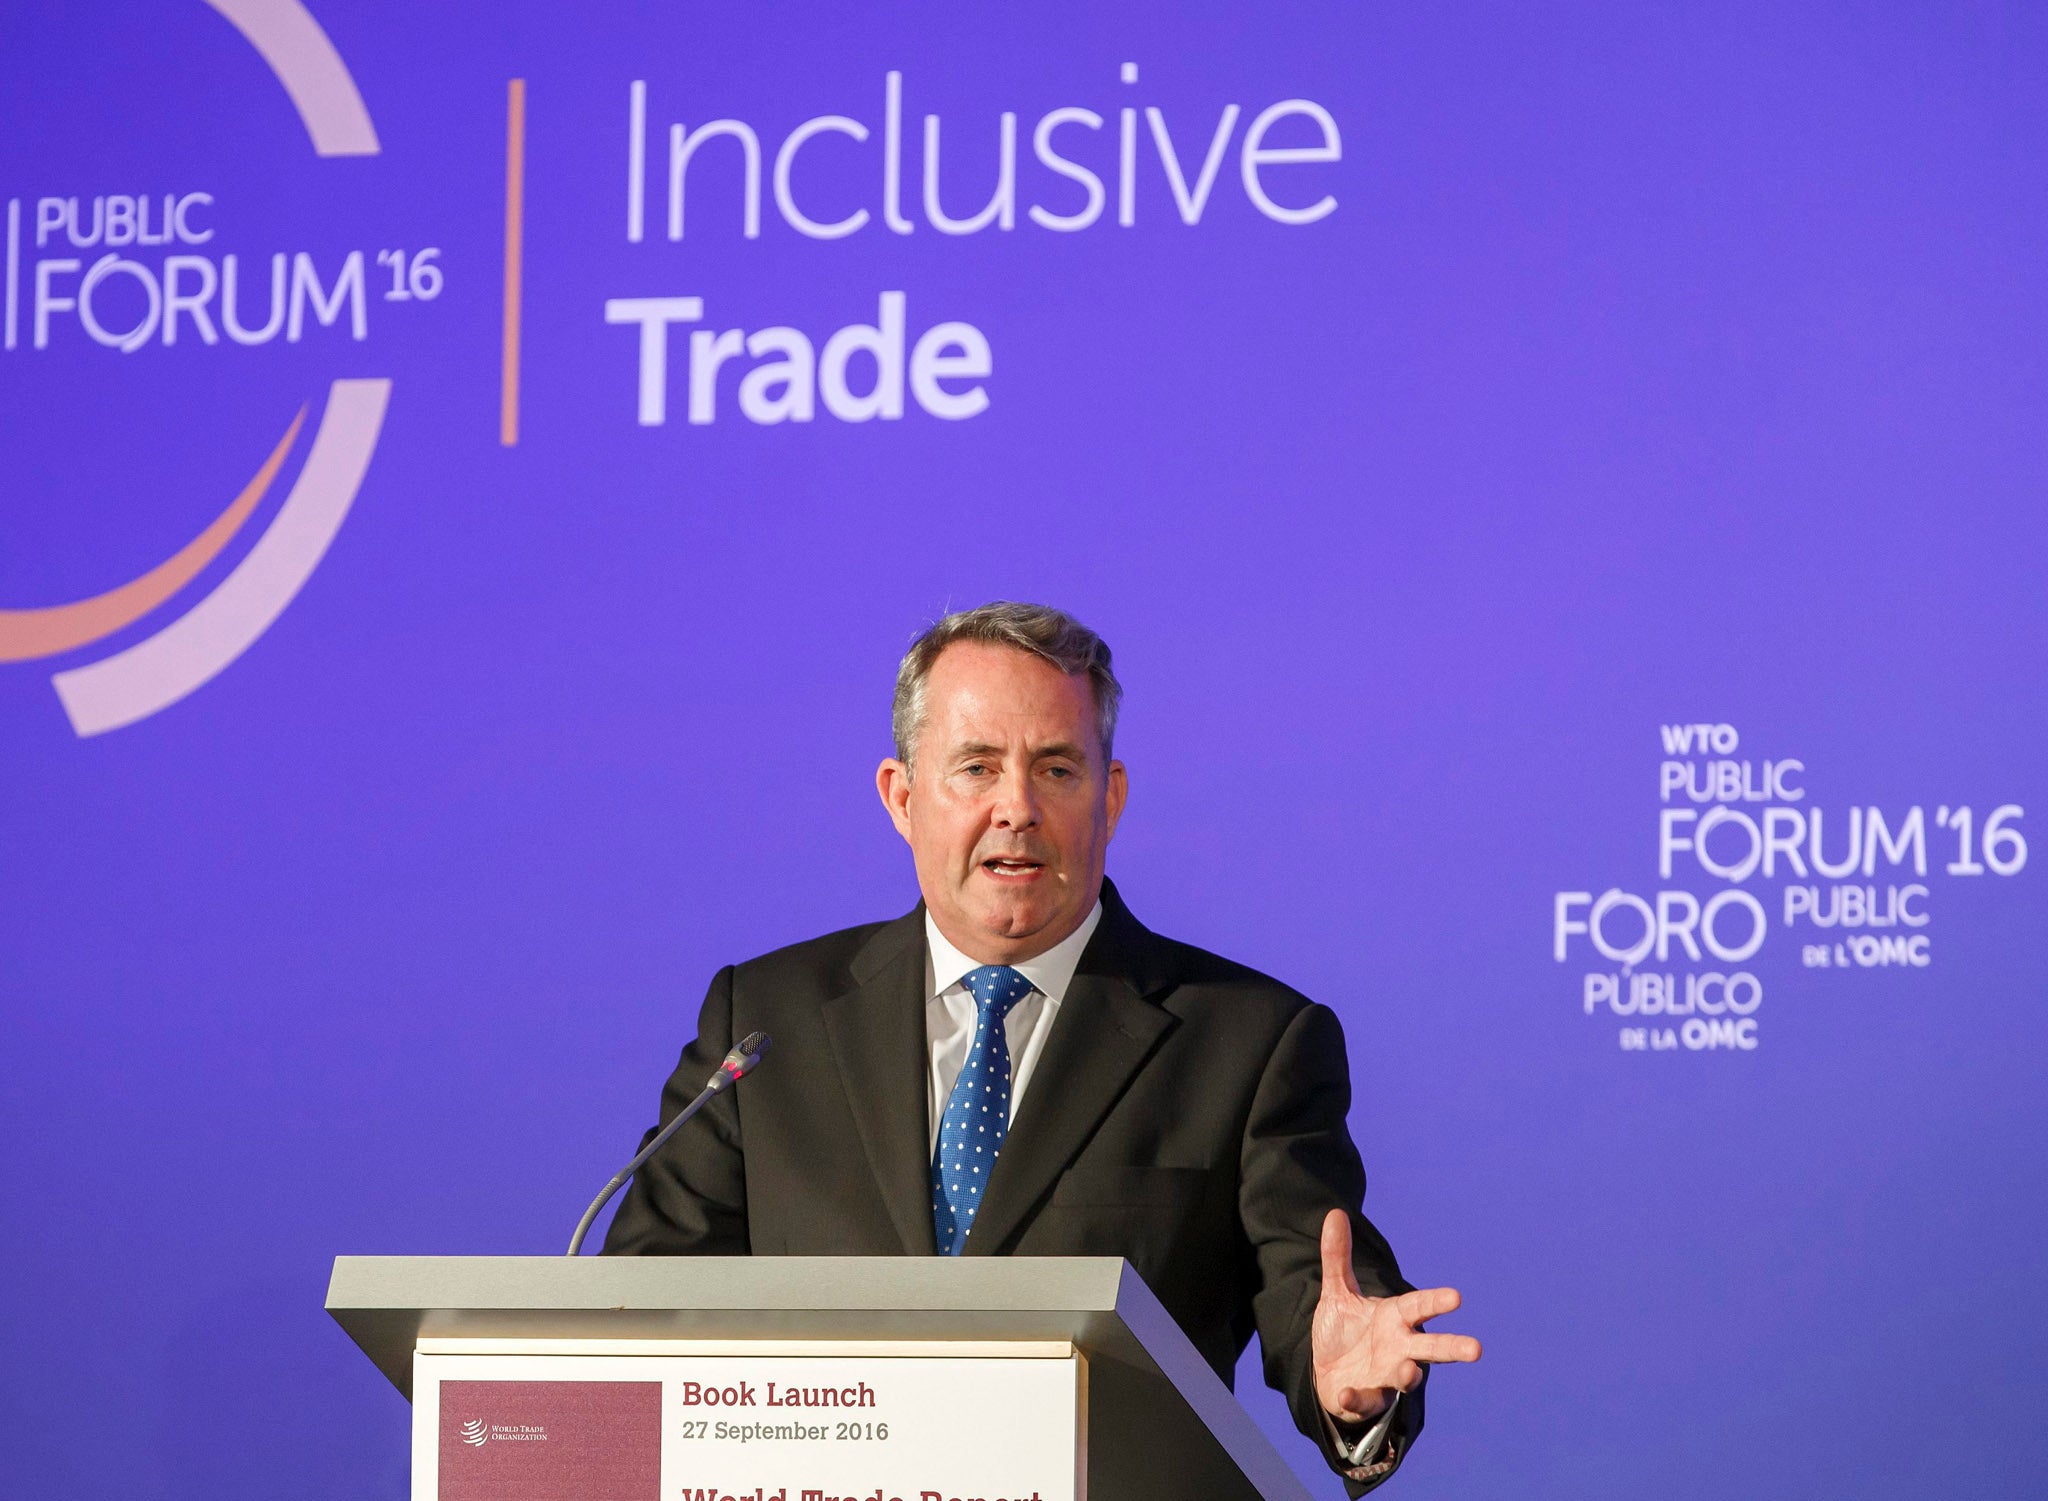 British Secretary of State for International Trade Liam Fox delivers his speech during the WTO Public Forum 'Inclusive Trade',